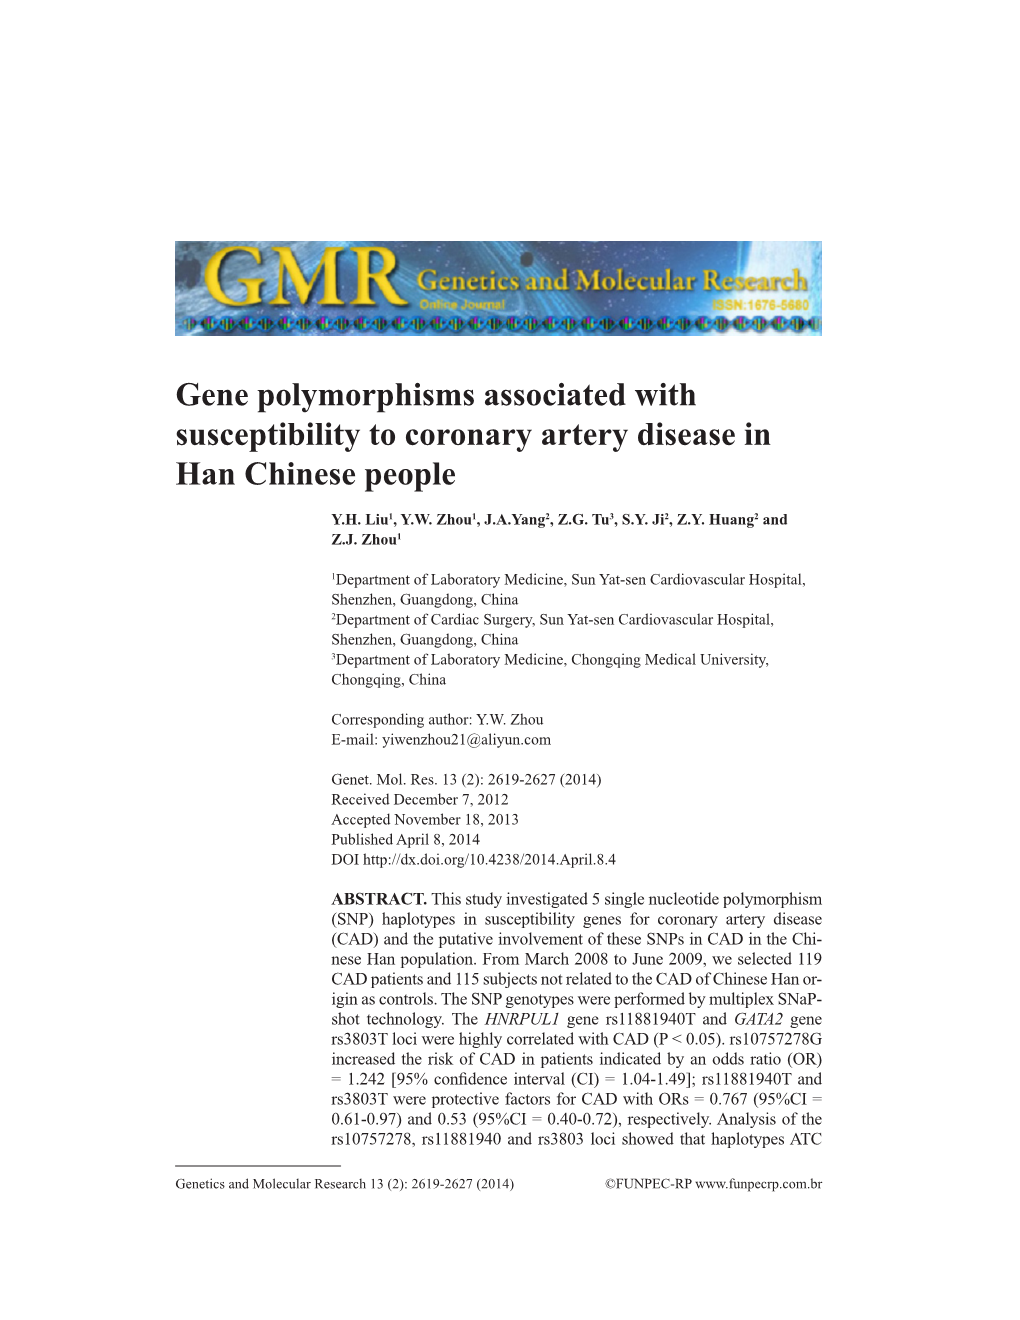 Gene Polymorphisms Associated with Susceptibility to Coronary Artery Disease in Han Chinese People